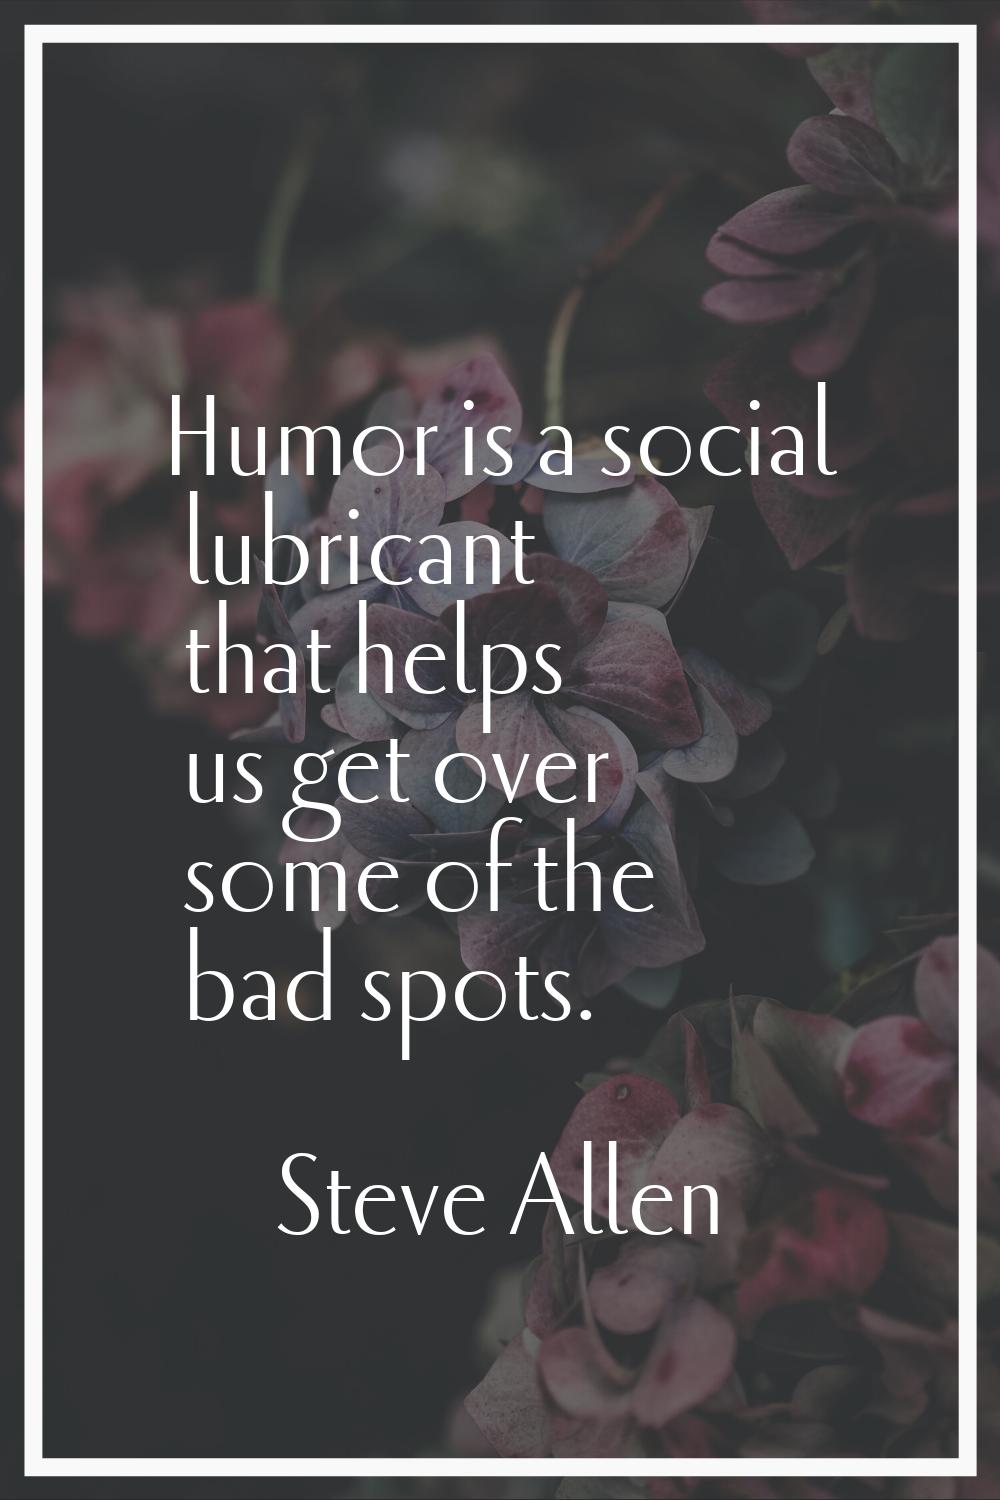 Humor is a social lubricant that helps us get over some of the bad spots.